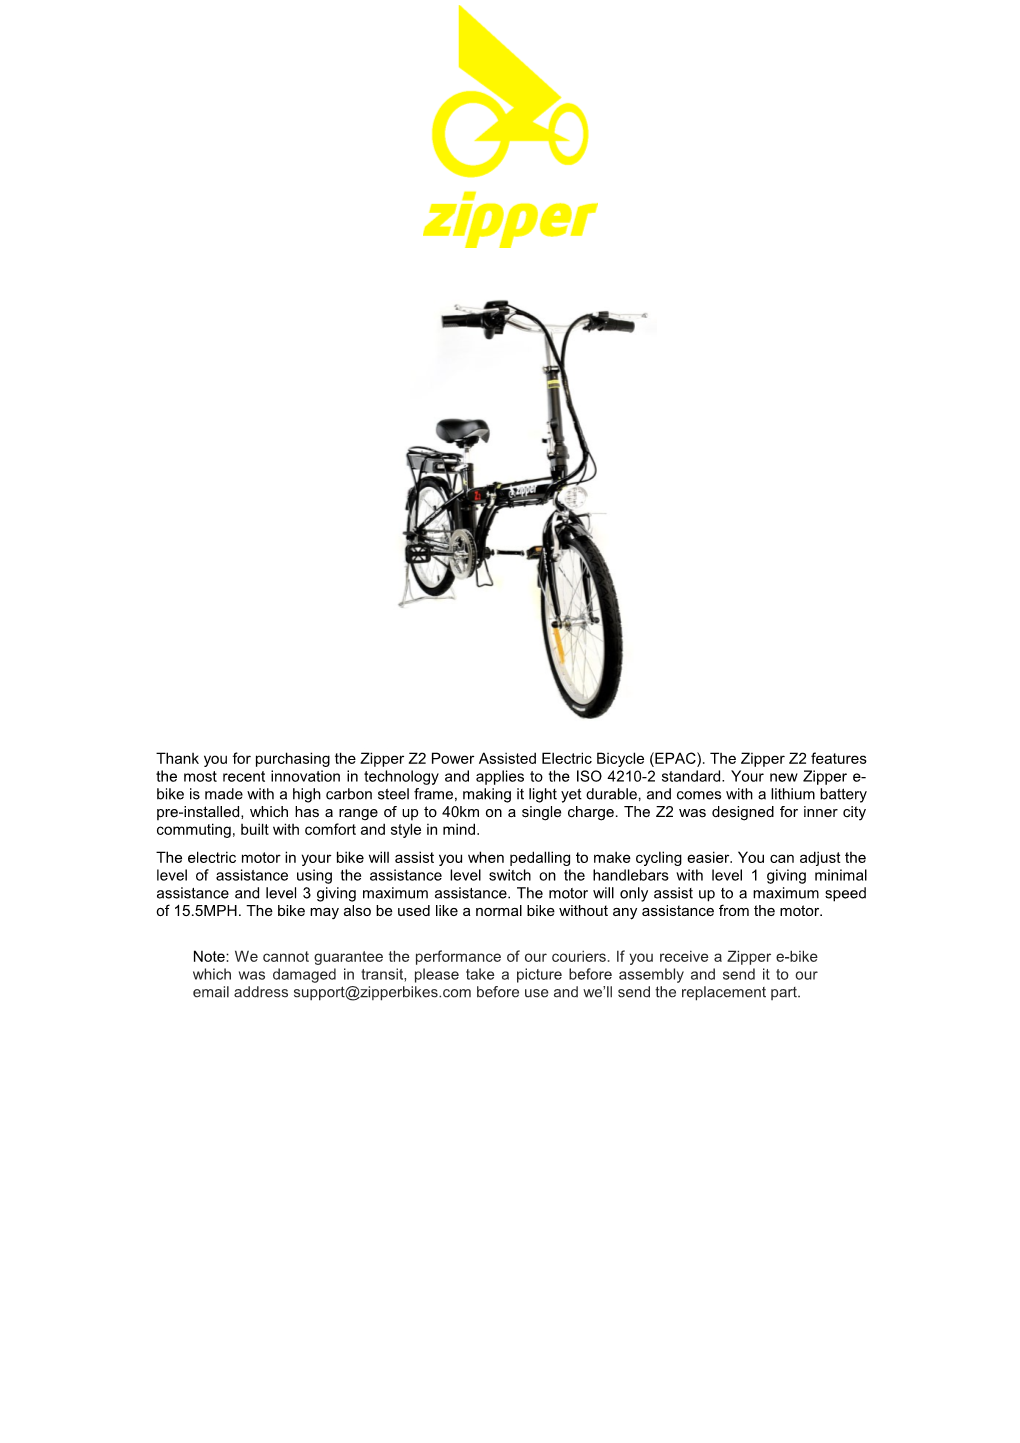 Thank You for Purchasing the Zipper Z2 Power Assisted Electric Bicycle (EPAC). the Zipper